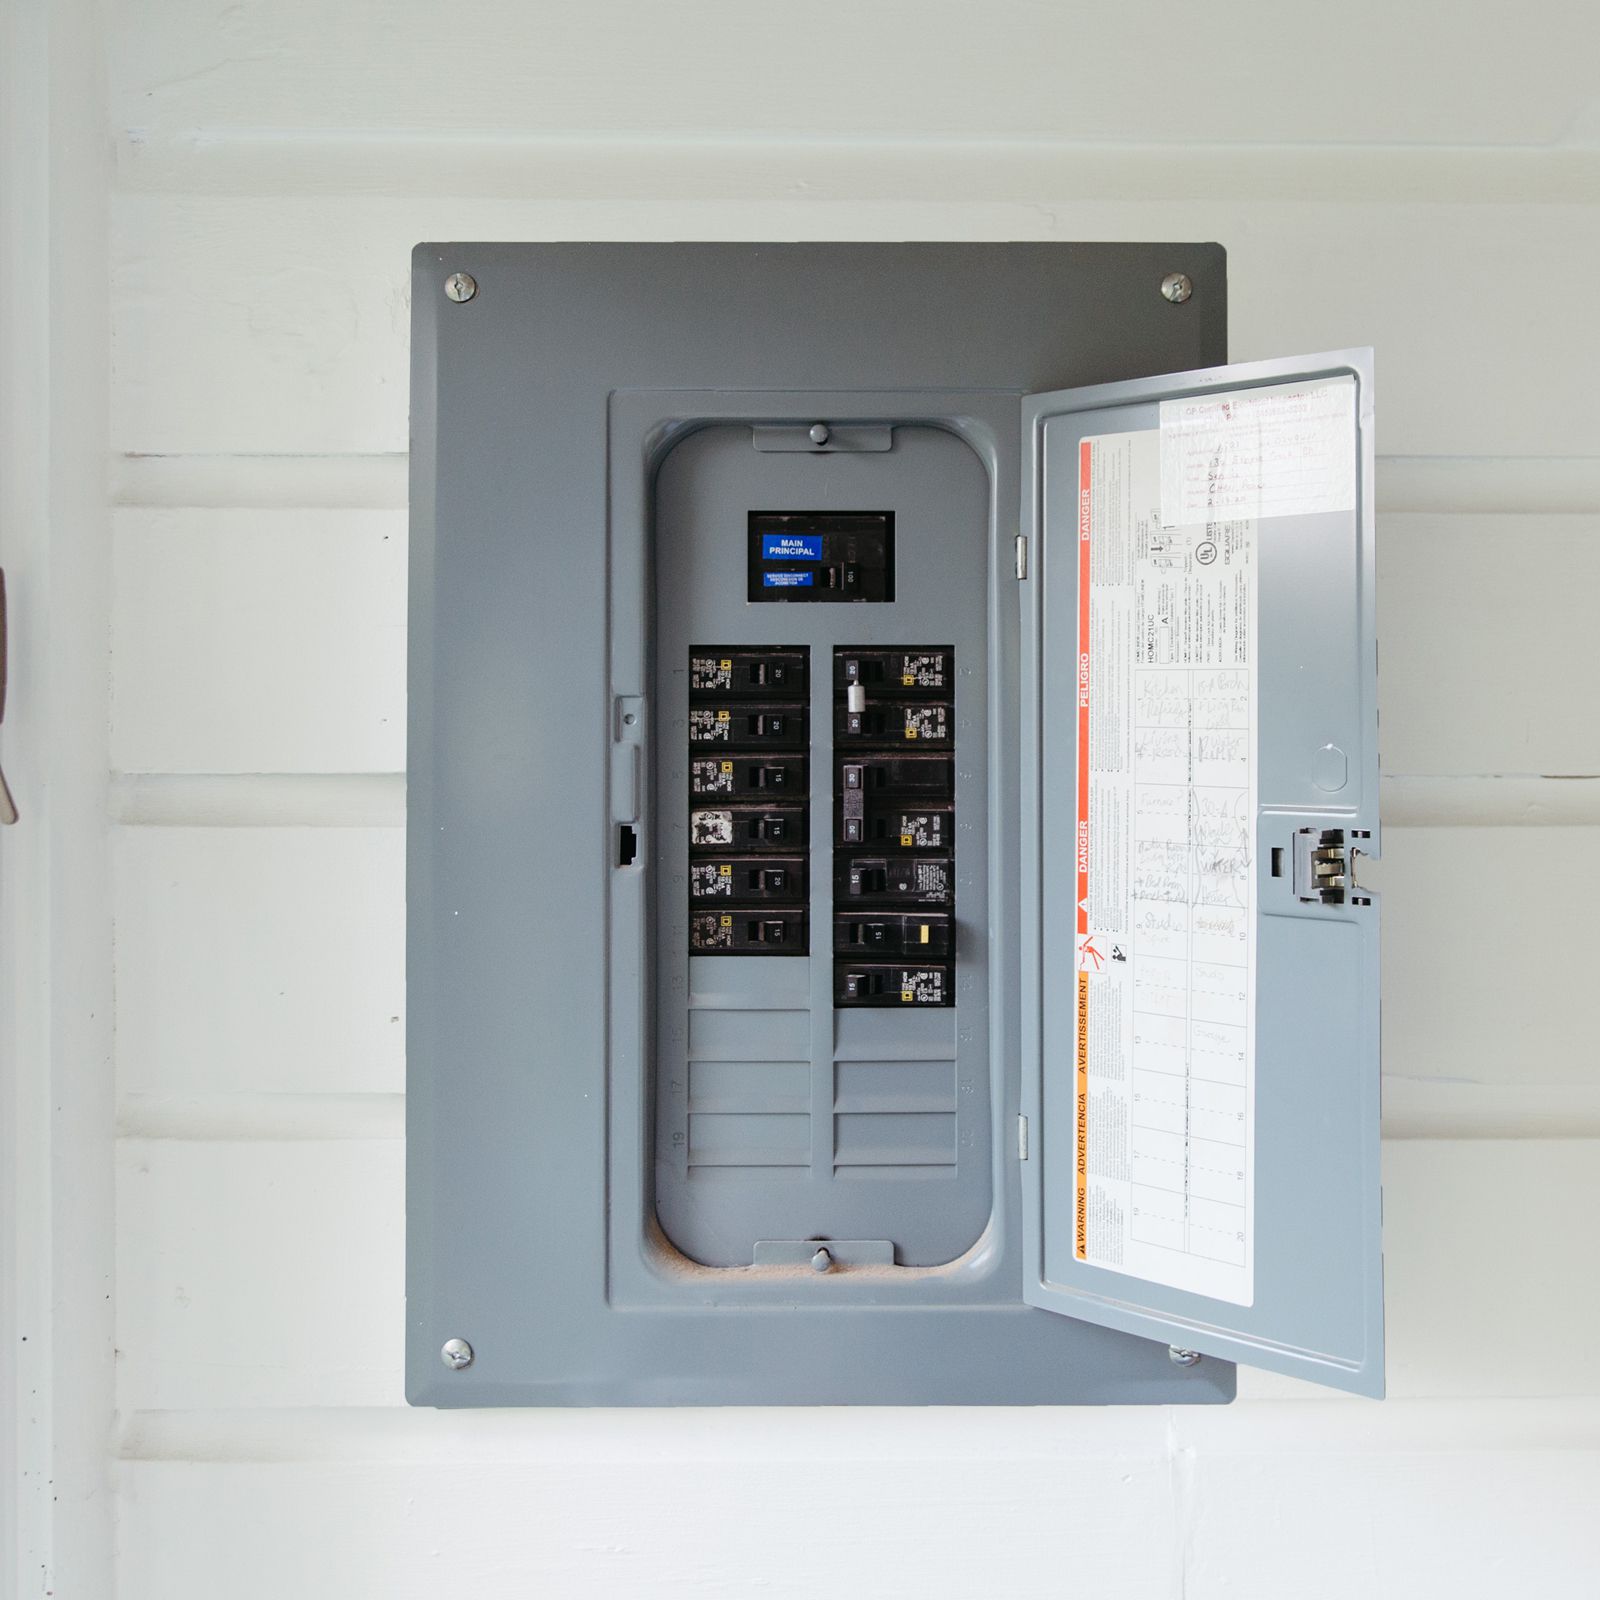 https://www.thefalcongroup.us/wp-content/uploads/2022/07/safely-turn-off-power-at-electrical-panel-1824677-hero-f3fb63ef45064eff9ded182ad4fb5d62.jpg